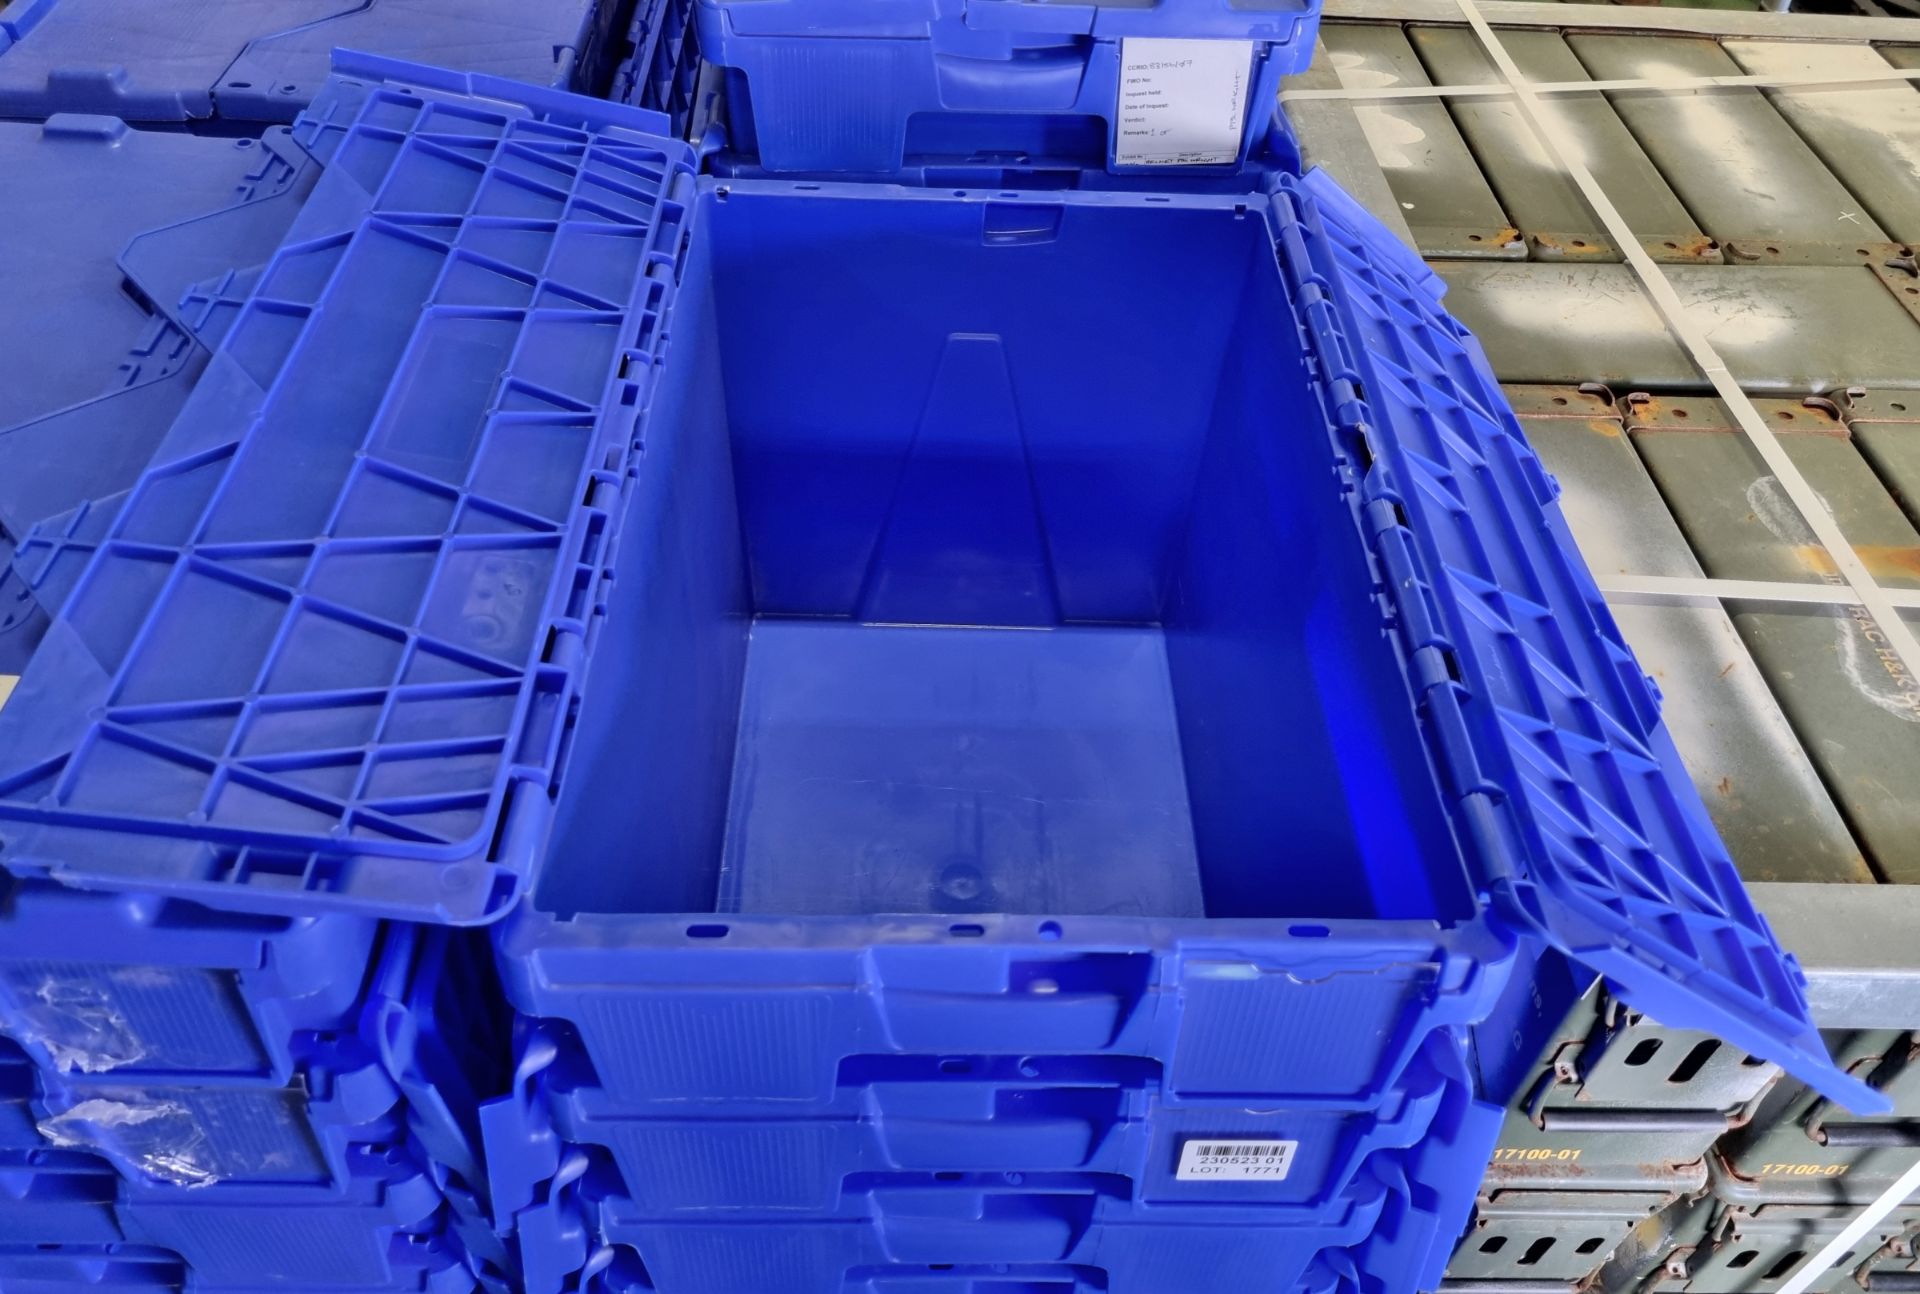 33x Blue Plastic containers - L 60 x W 37 x H 40cm - Image 3 of 3